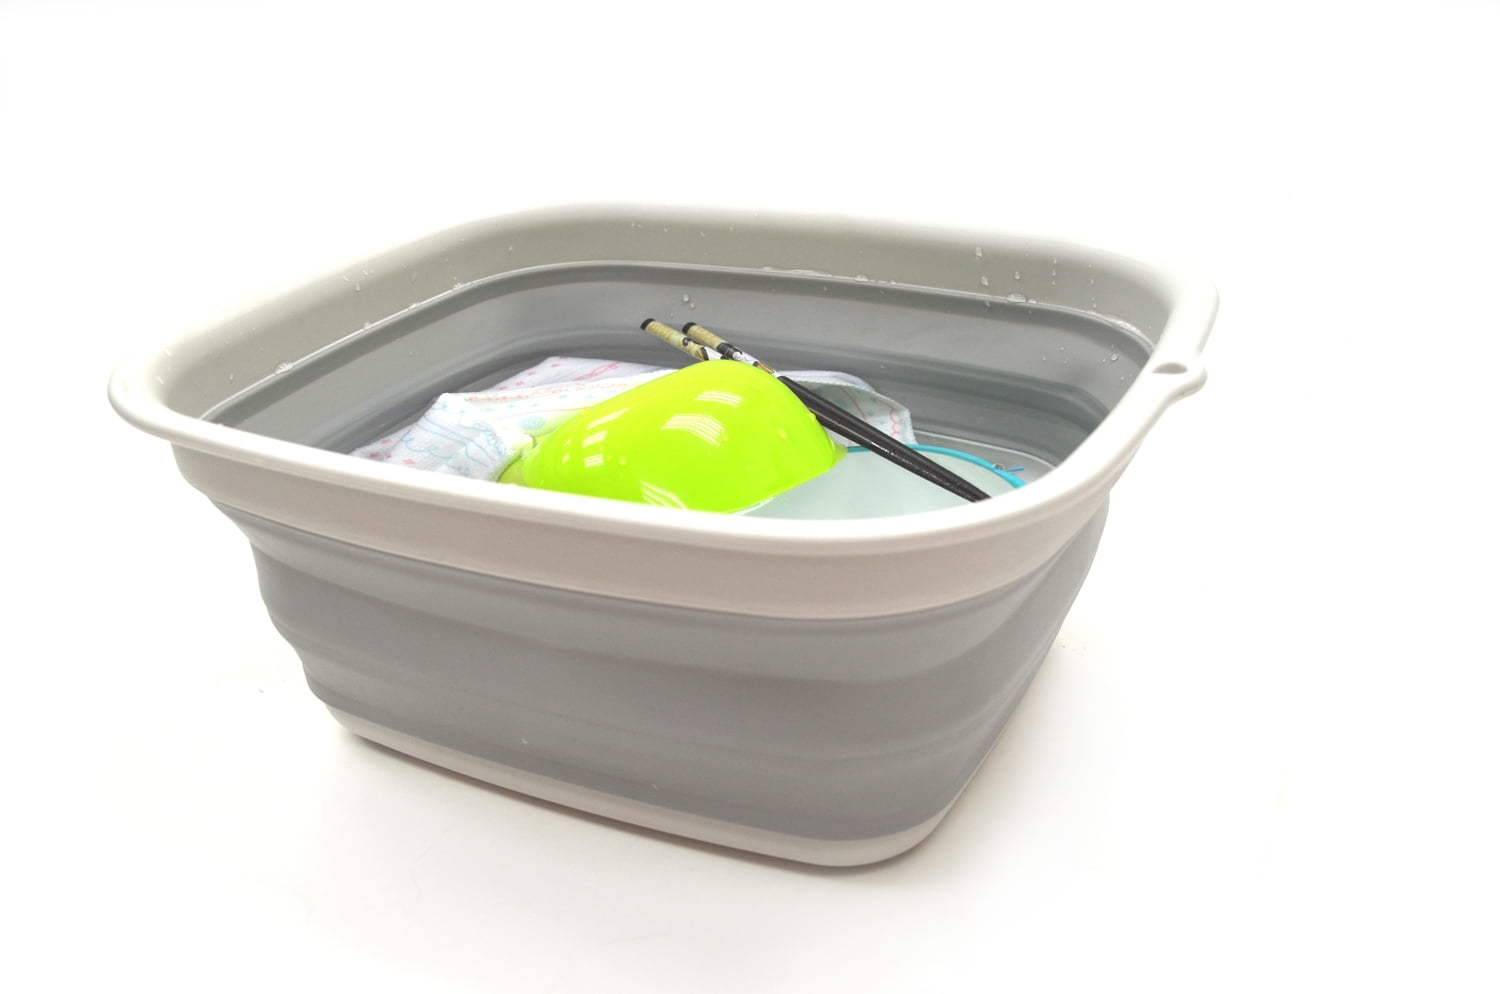 2.5 Gallon Collapsible Foldable Dish Tub Portable Washing Basin Space cleanup